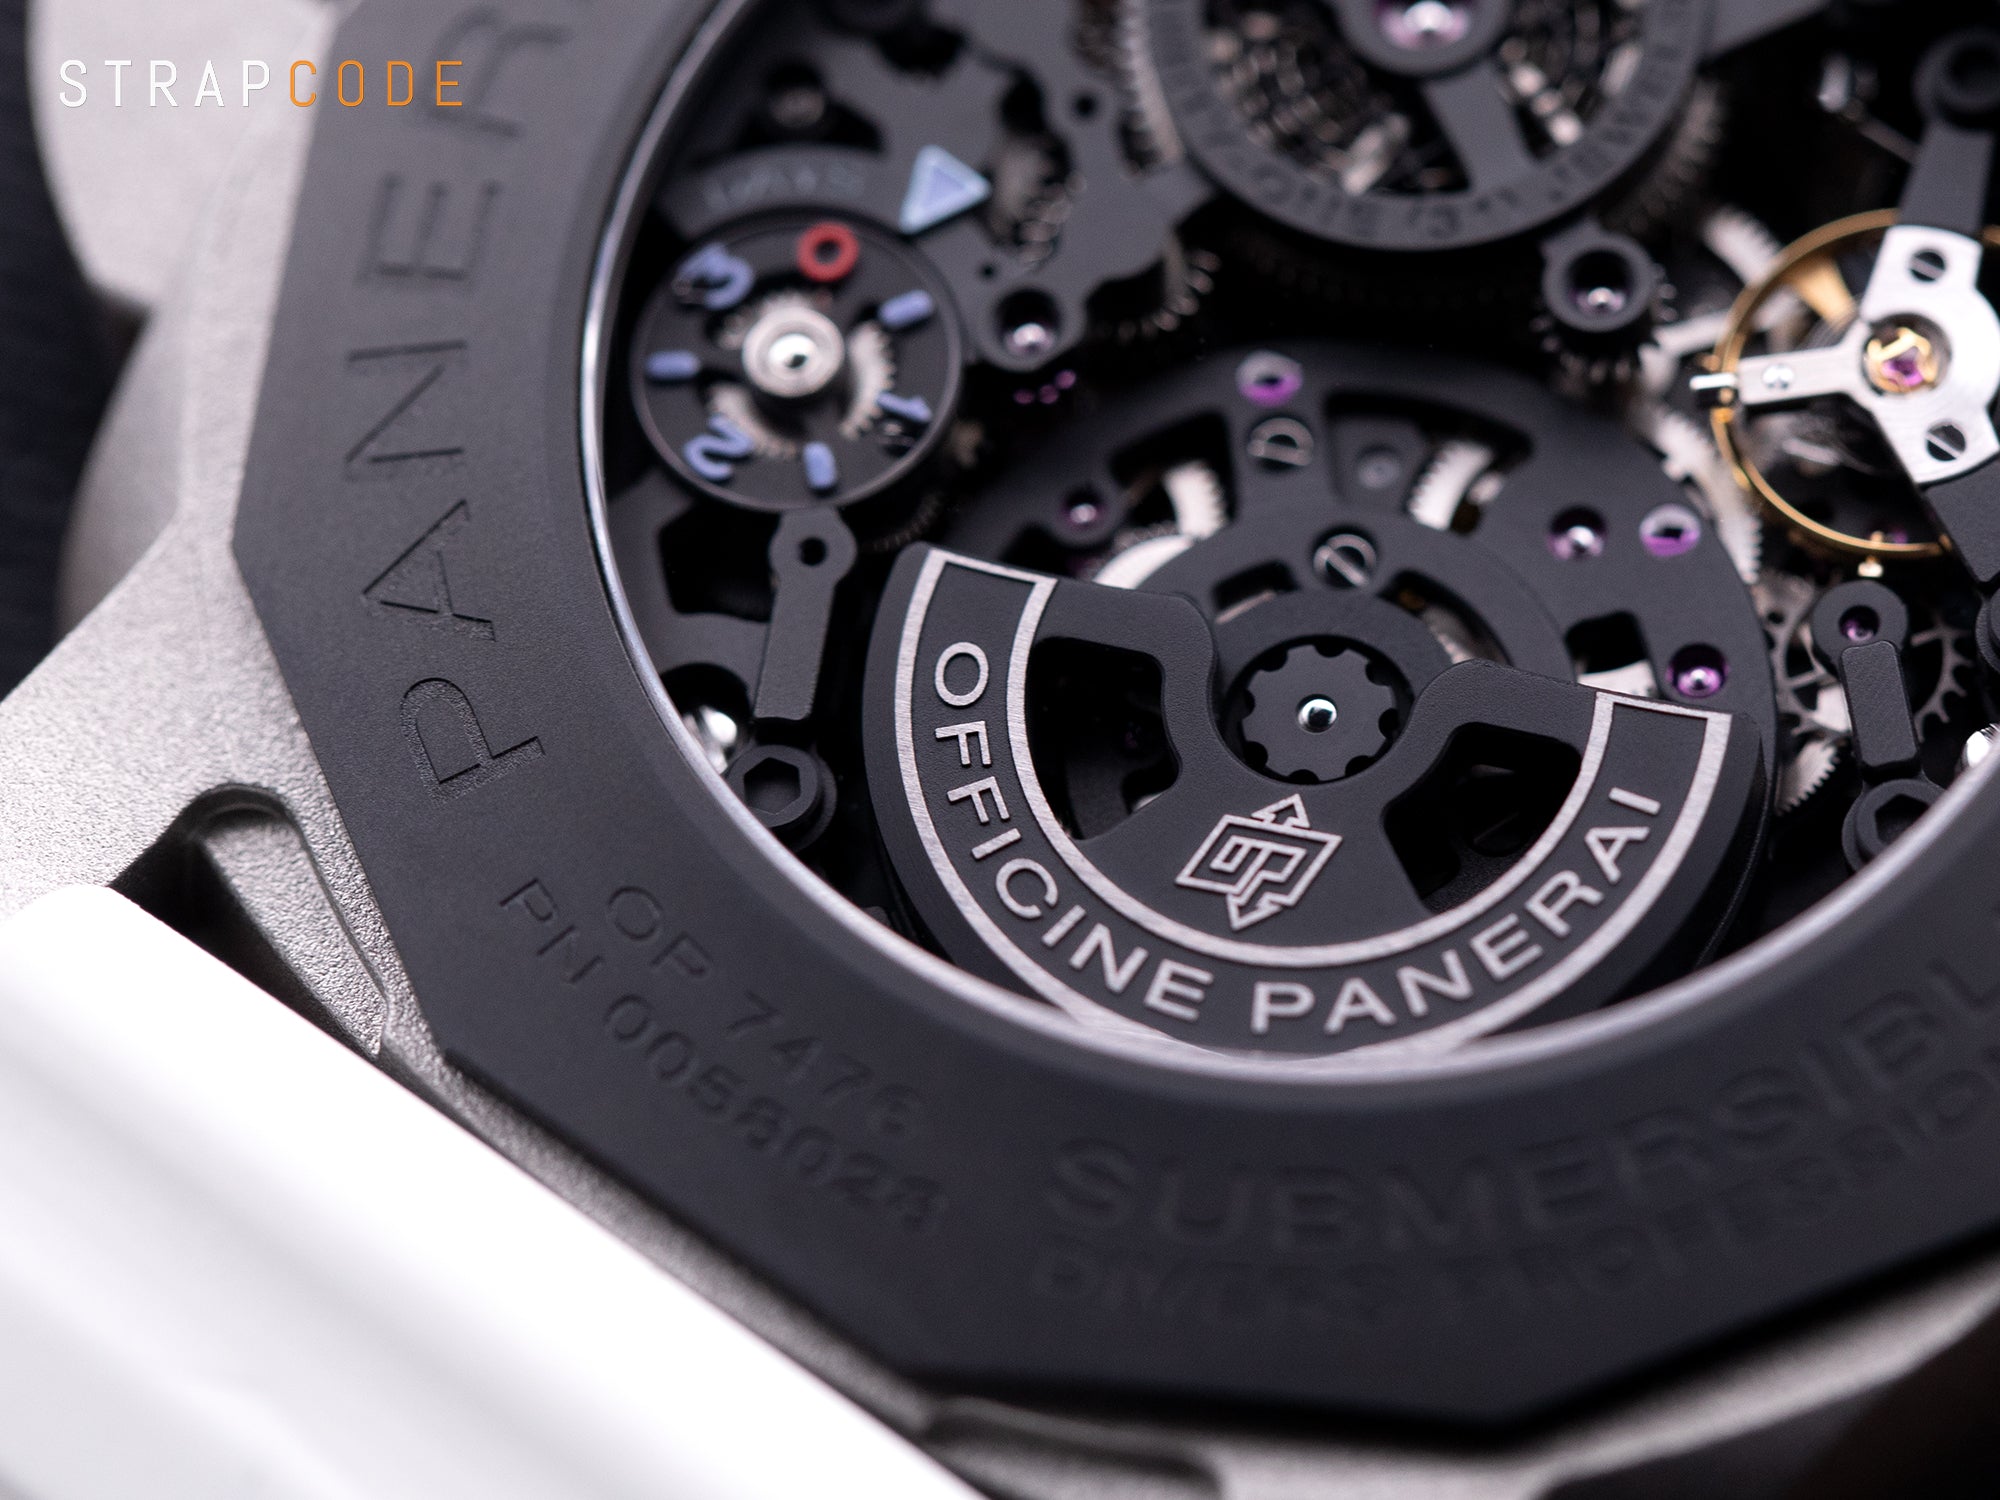 Panerai Submersible S Brabus The one-piece off-centered oscillating motor